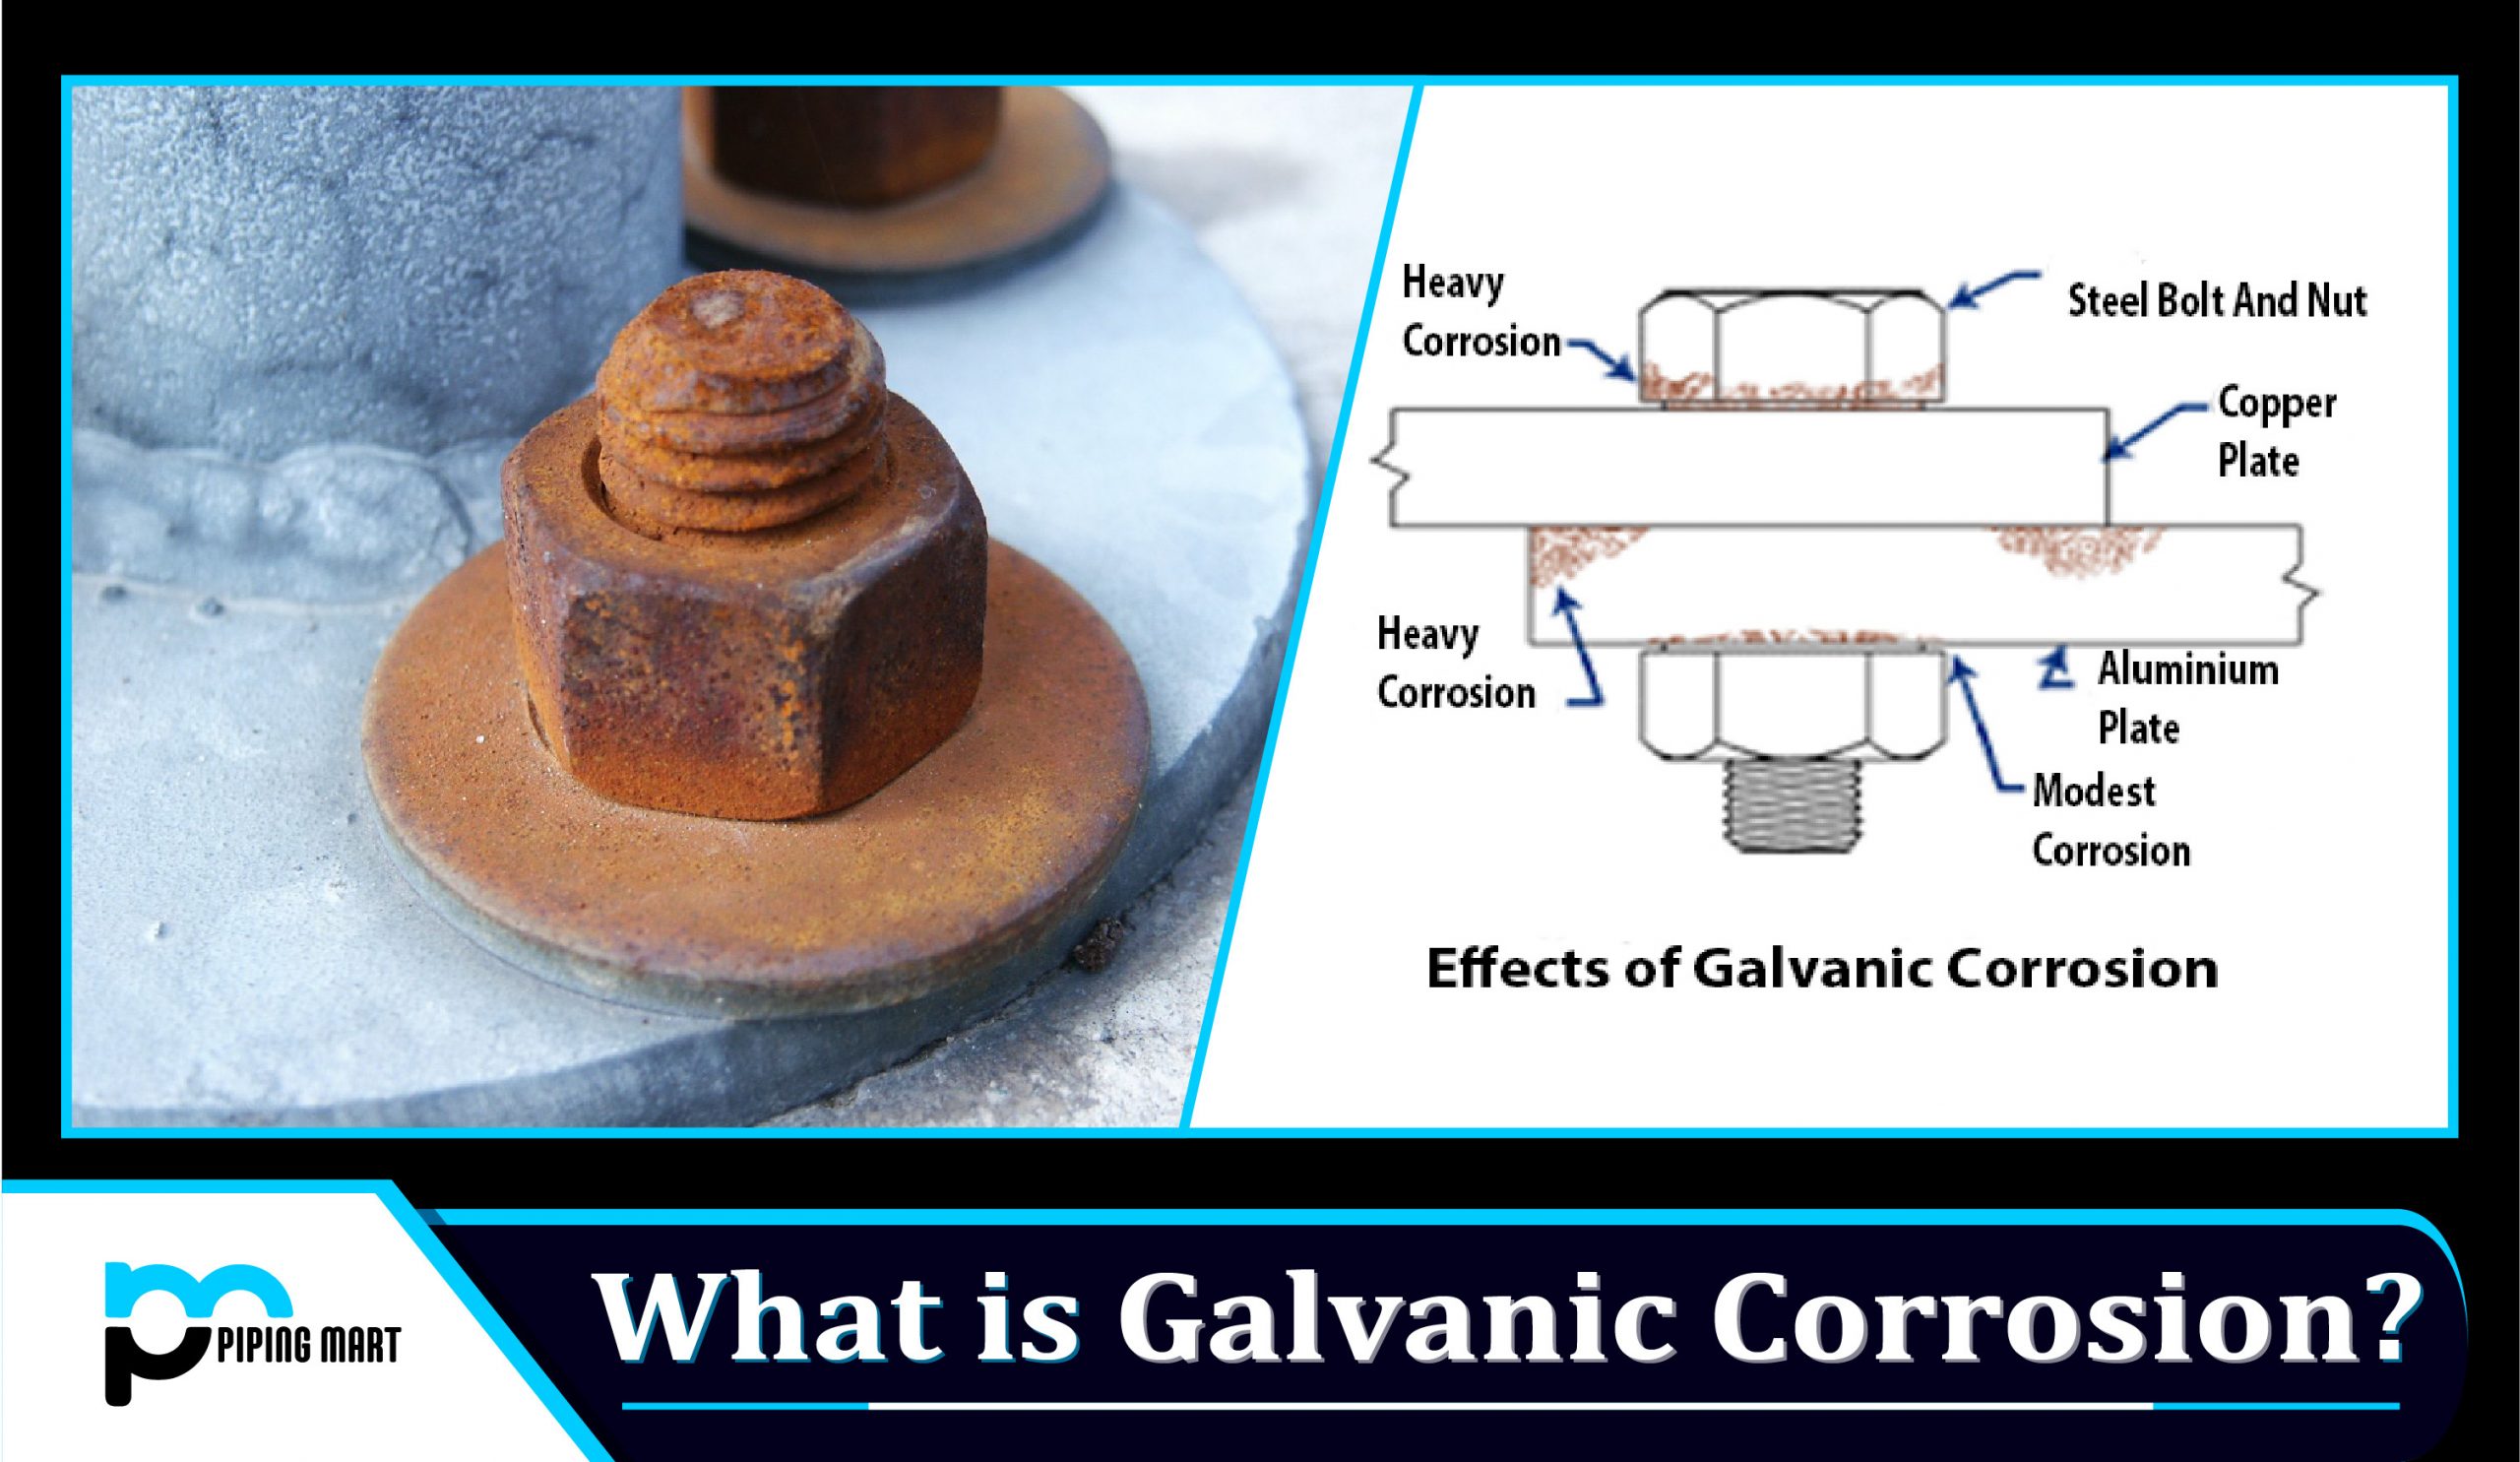 What is Galvanic Corrosion?